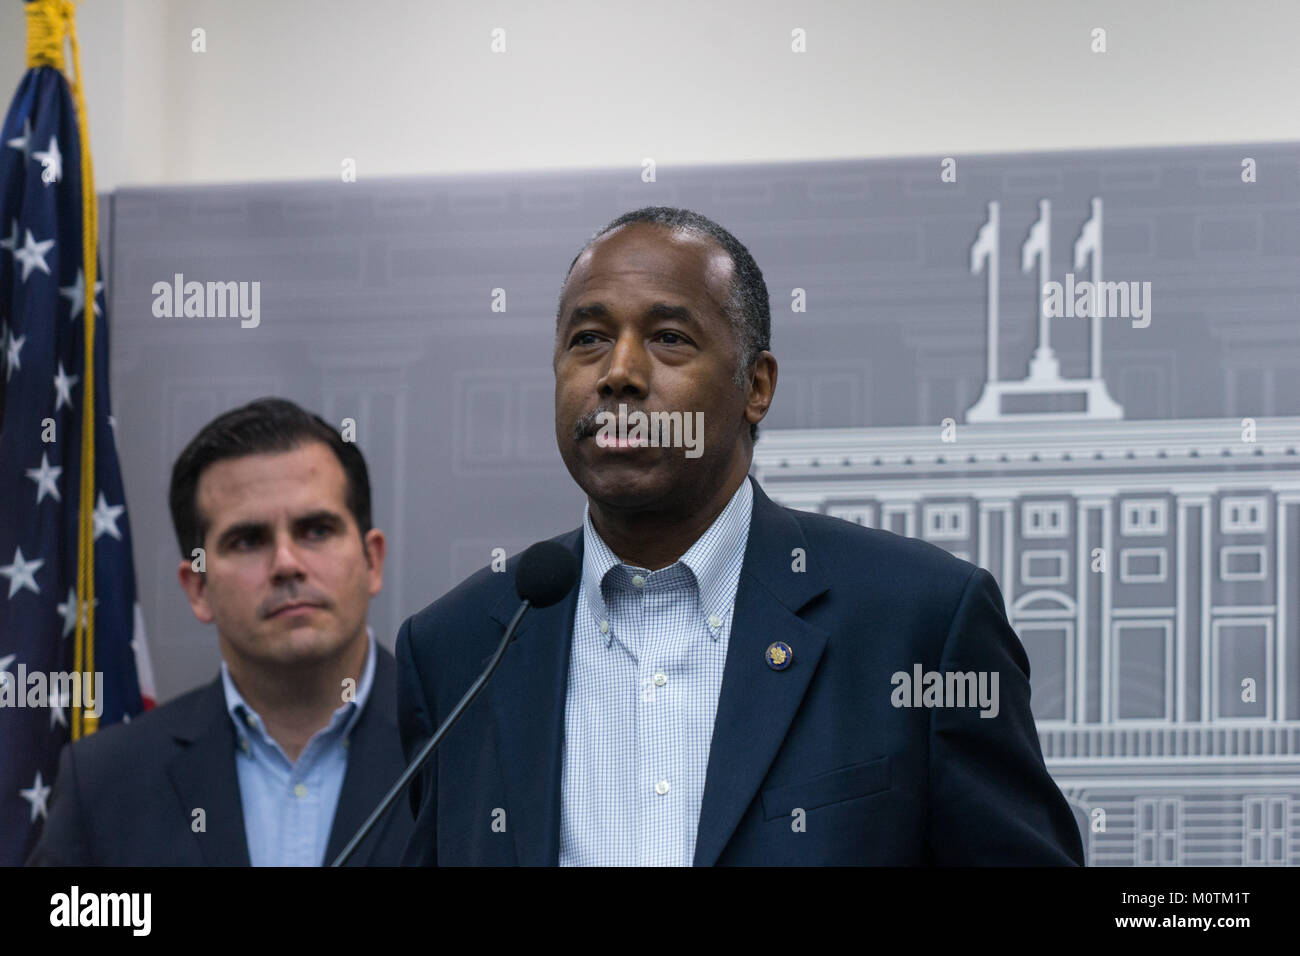 United States Secretary of Housing and Urban Development, Ben Carson, and United States Secretary of Homeland Security, Kirstjen Nielsen, visited Puerto Rico and attended a press conference alongside the Governor of Puerto Rico, Ricardo Roselló. Stock Photo